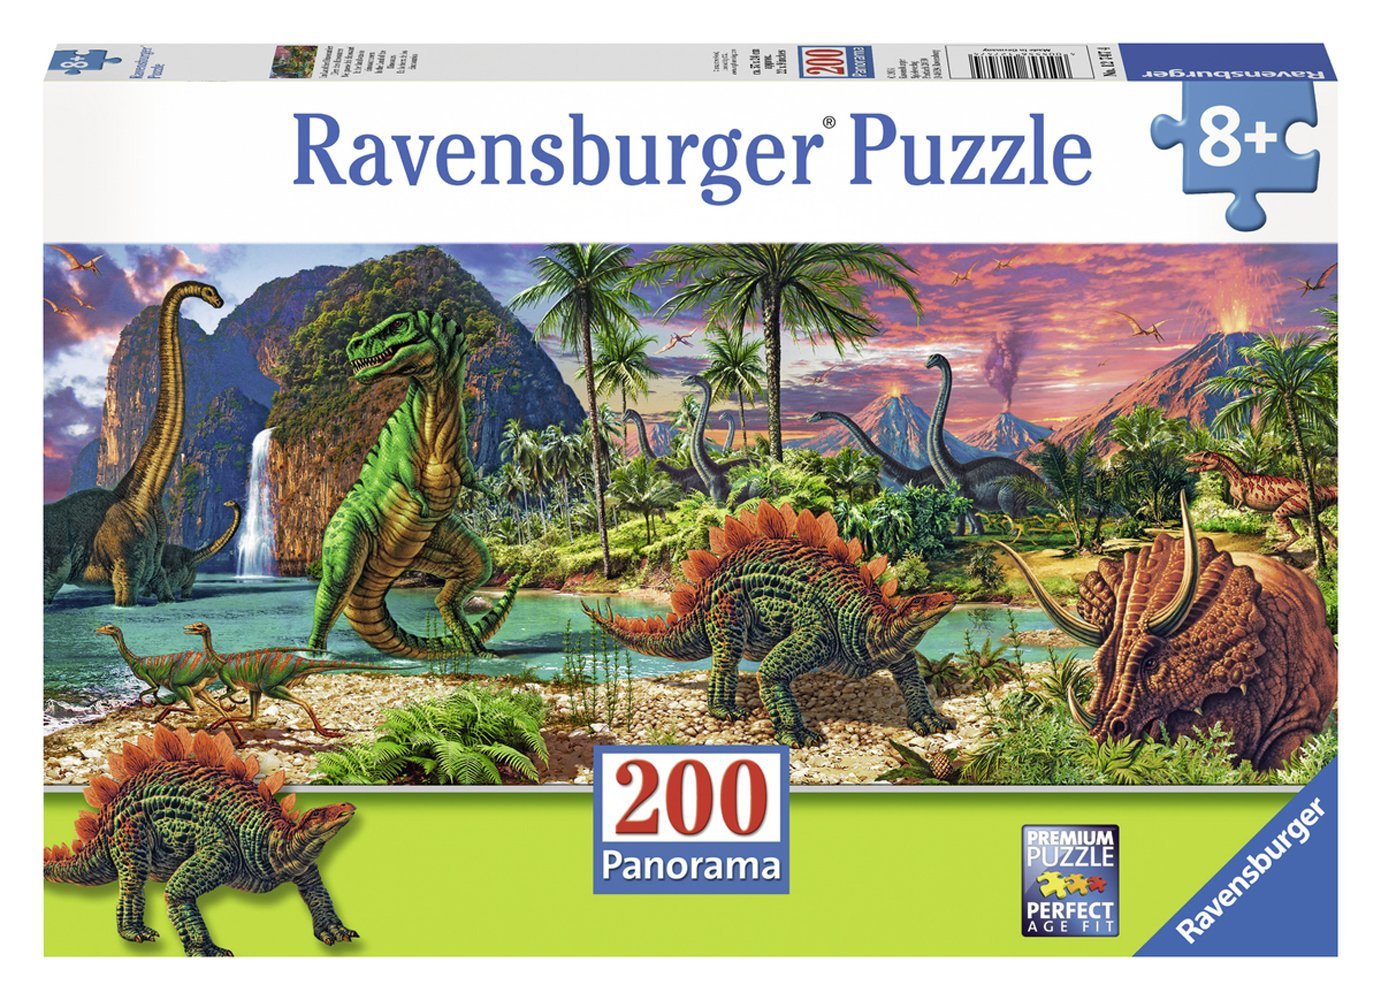 Ravensburger 'In The Land of Dinos' Panorama 200 Piece Jigsaw Puzzle Game